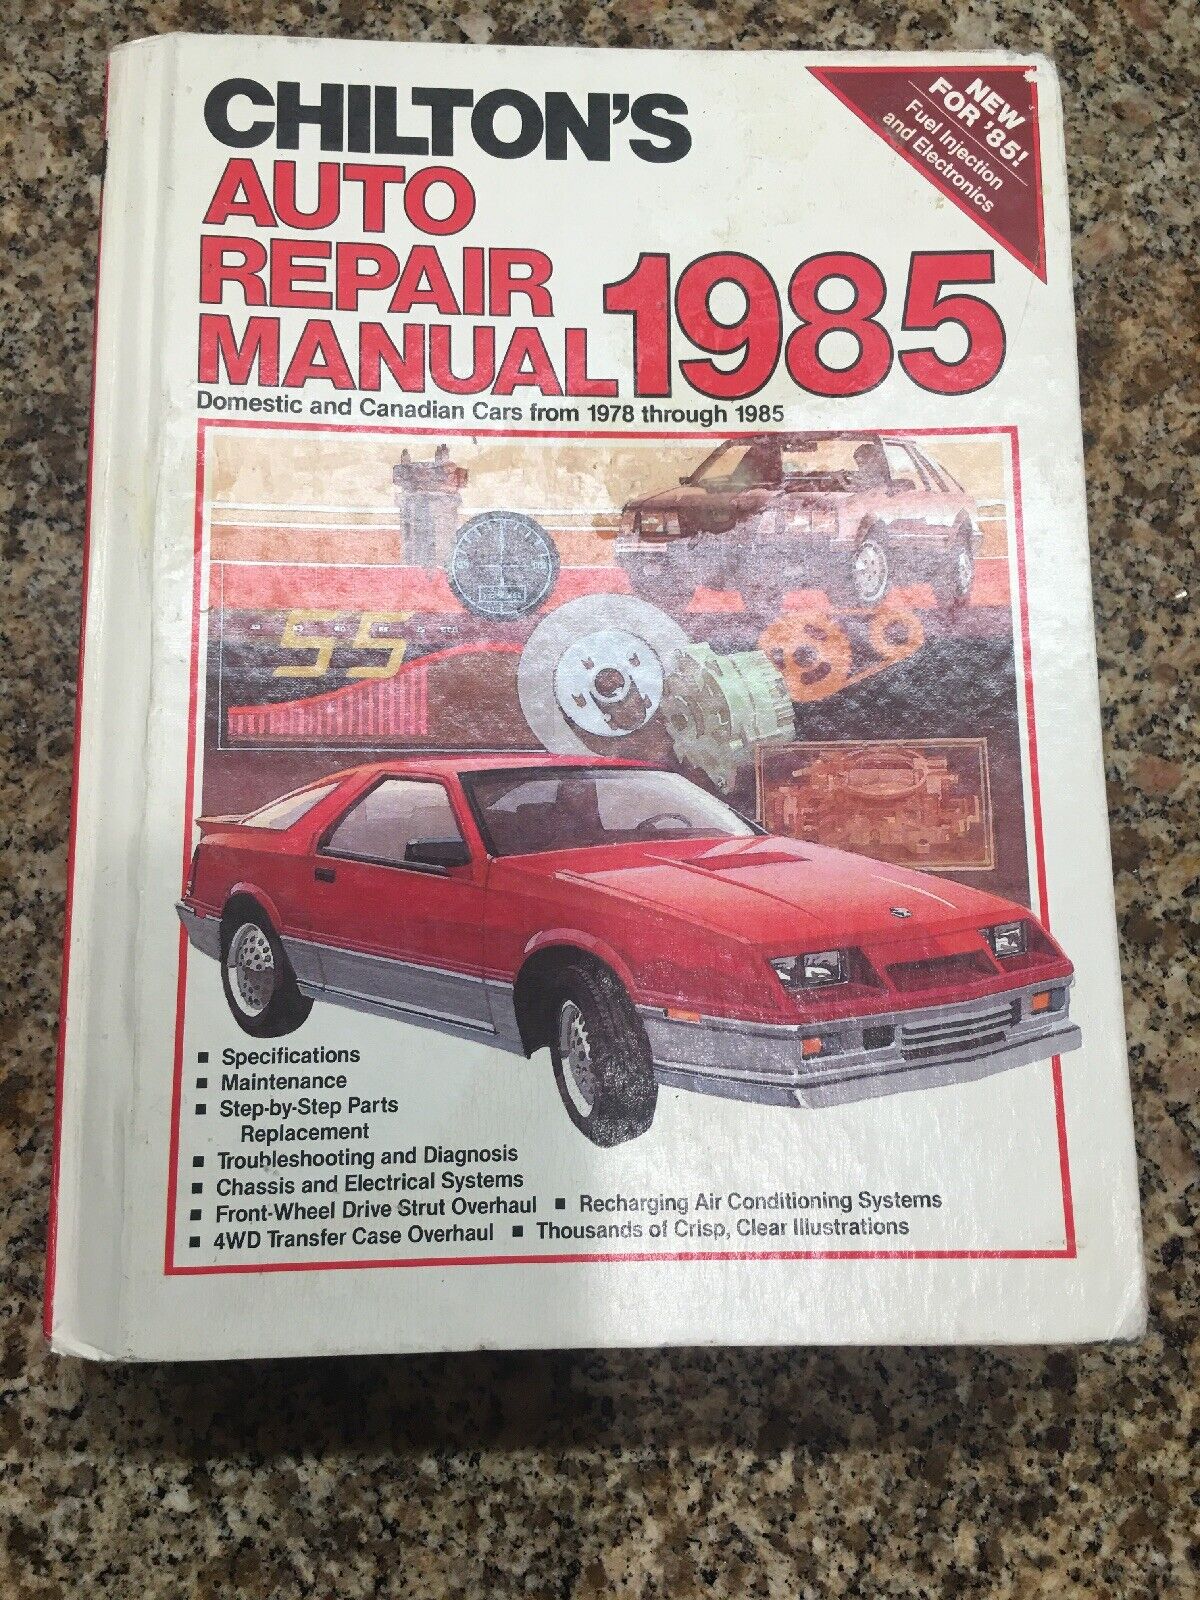 Chilton\'s Auto Repair Manual 1985 for Domestic & Canadian Cars 1978 to 1985